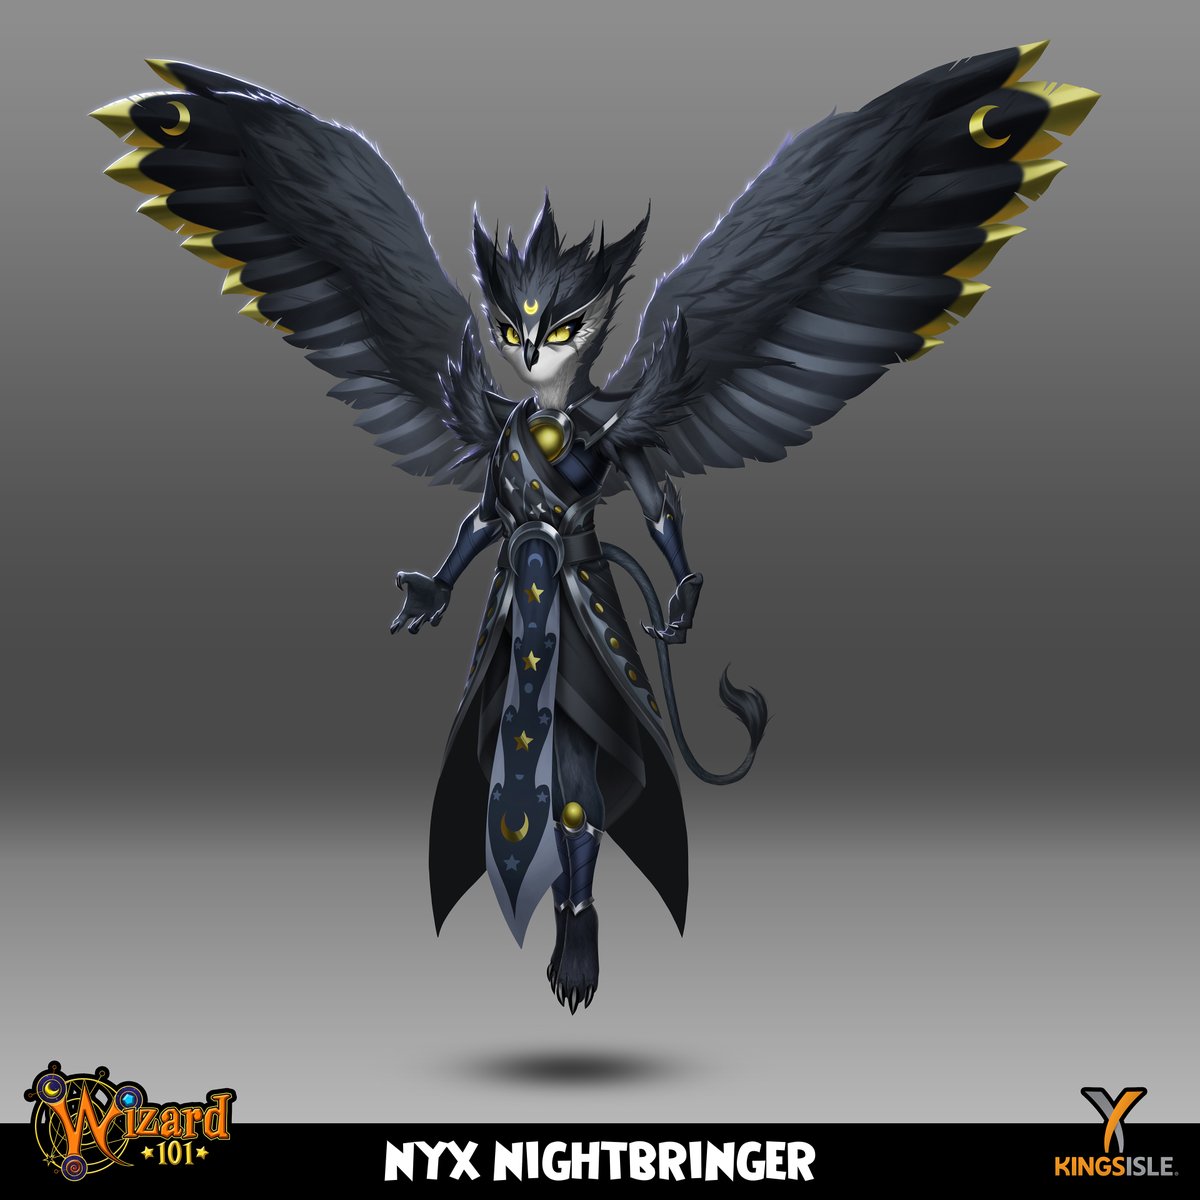 Nyx Nightbringer, easily my favorite character to have designed for the new Lost Library Gauntlet. She's a scary owl gryphon with tons of astral motifs on her clothing, like the moon phases and the tides on her skirts, & crescents and stars everywhere. @Wizard101 #wizard101